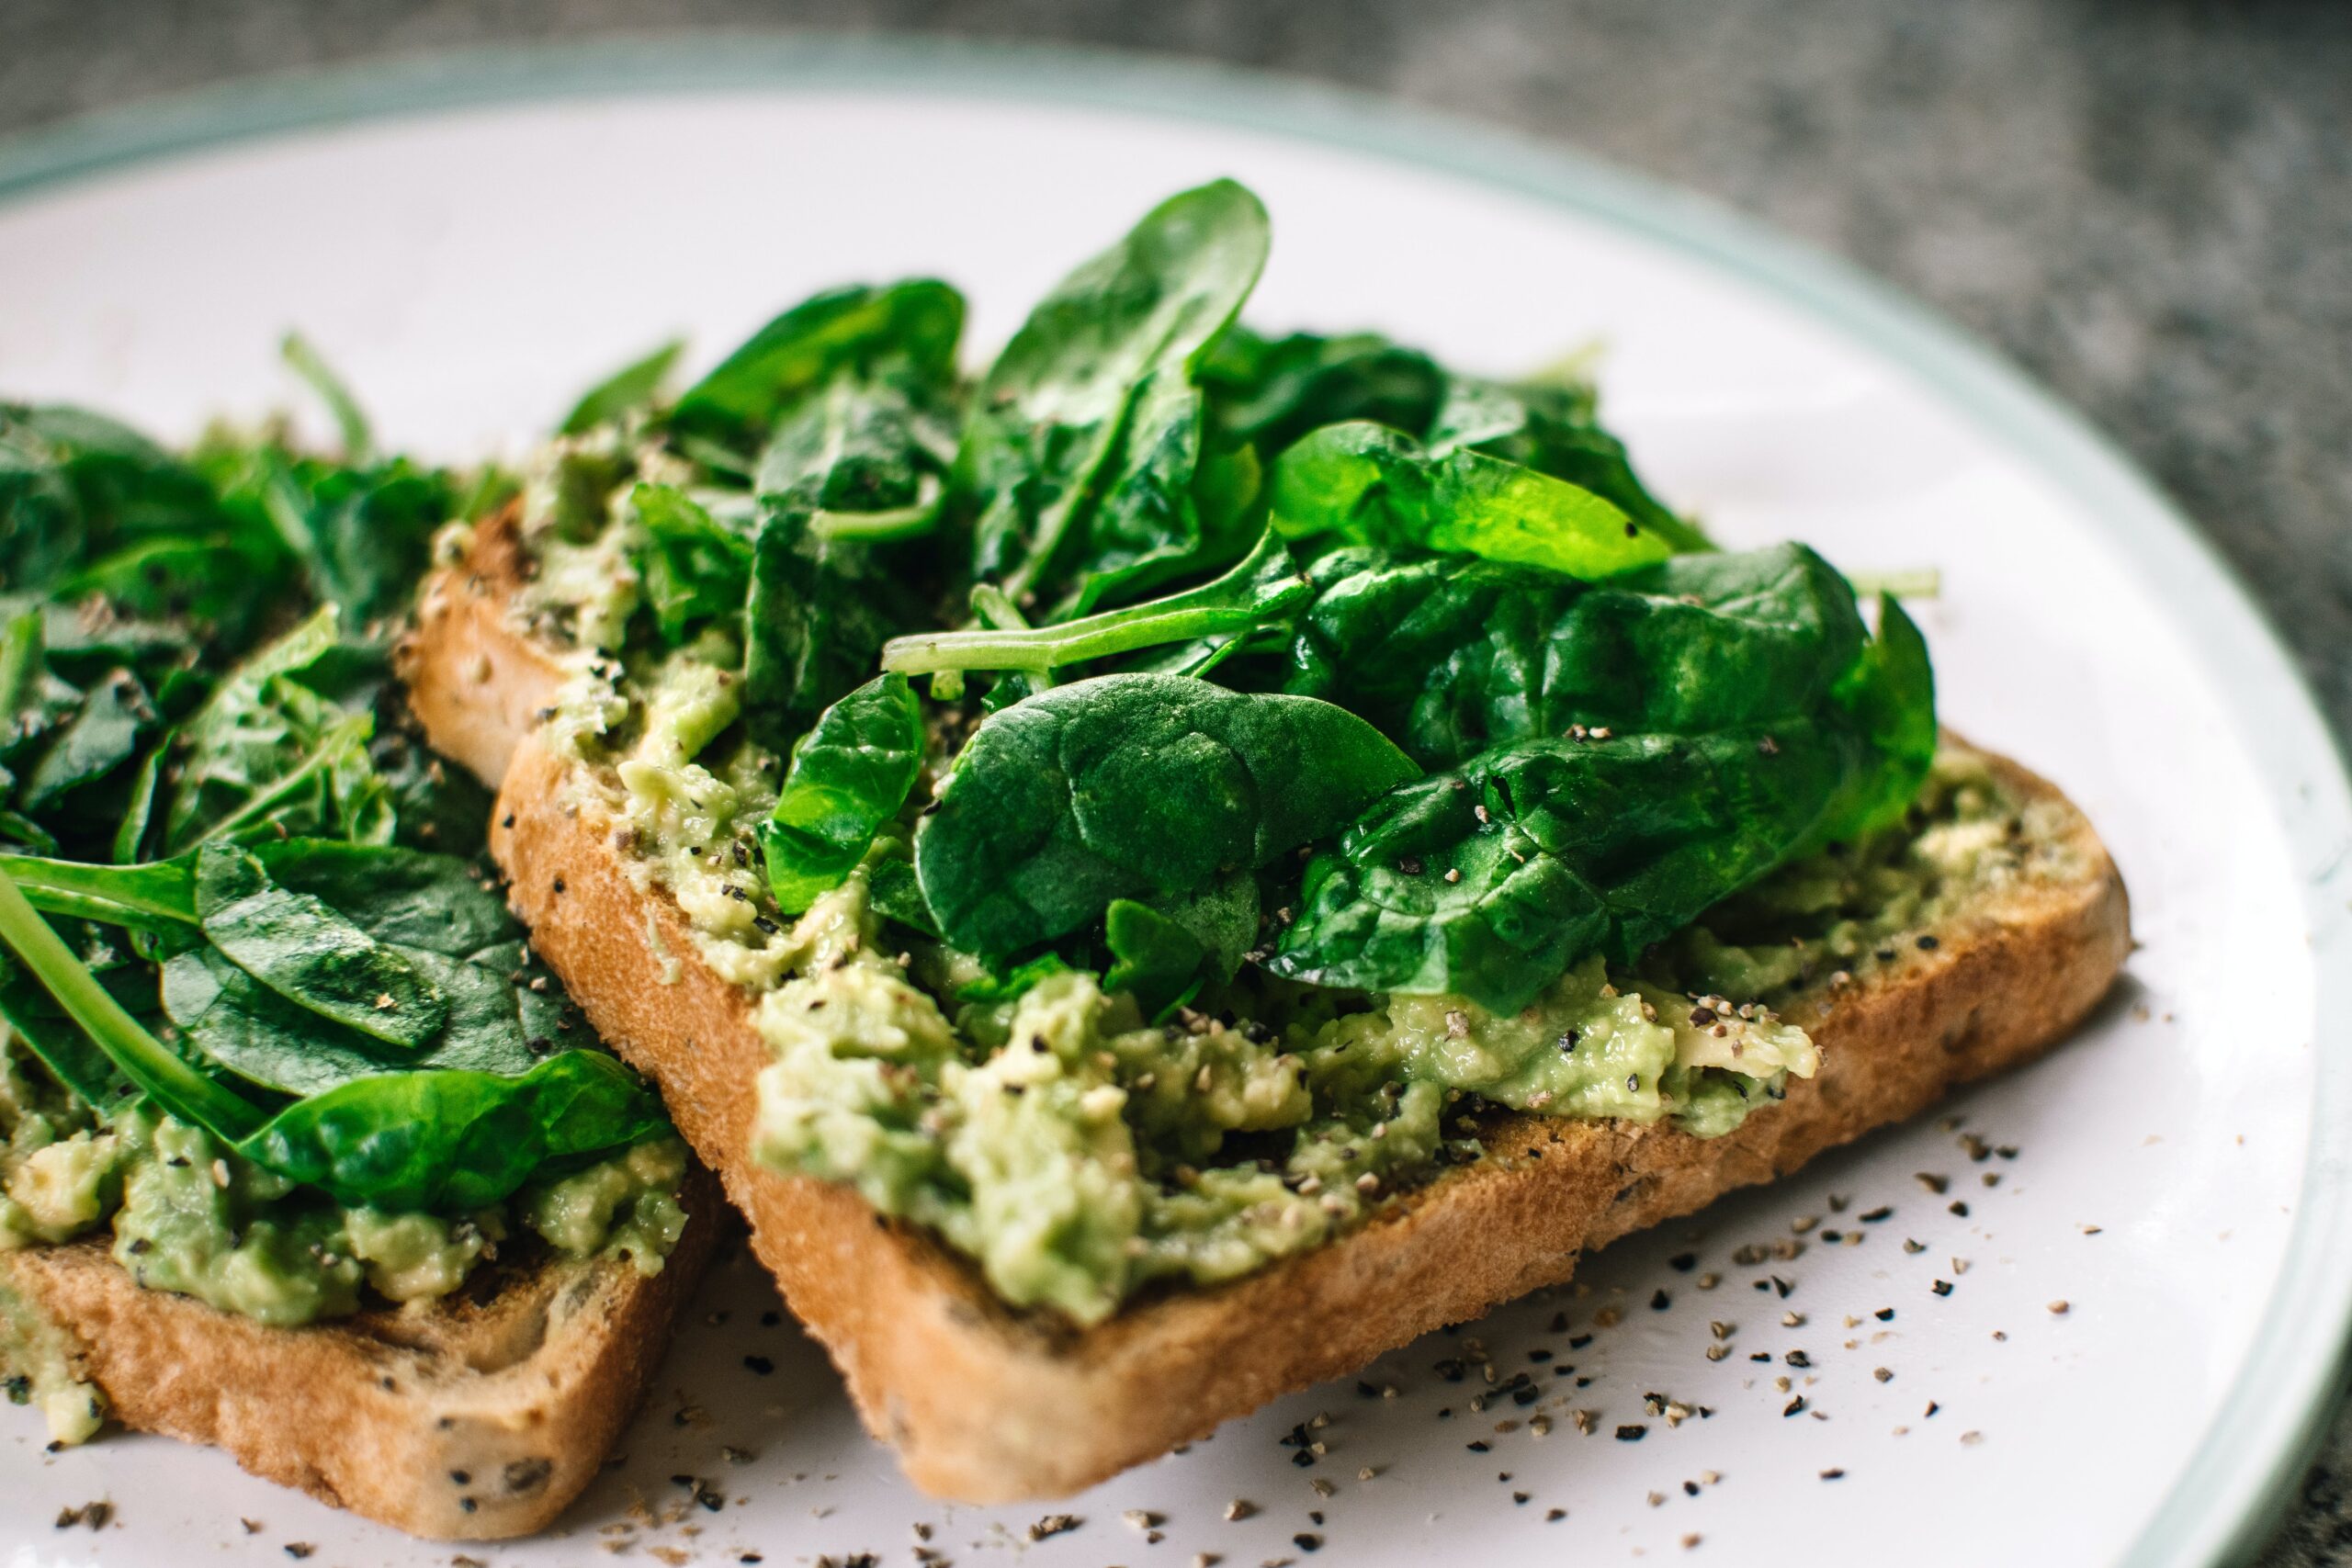 Simple Ways to Incorporate More Spinach and Leafy Greens Into Your Diet